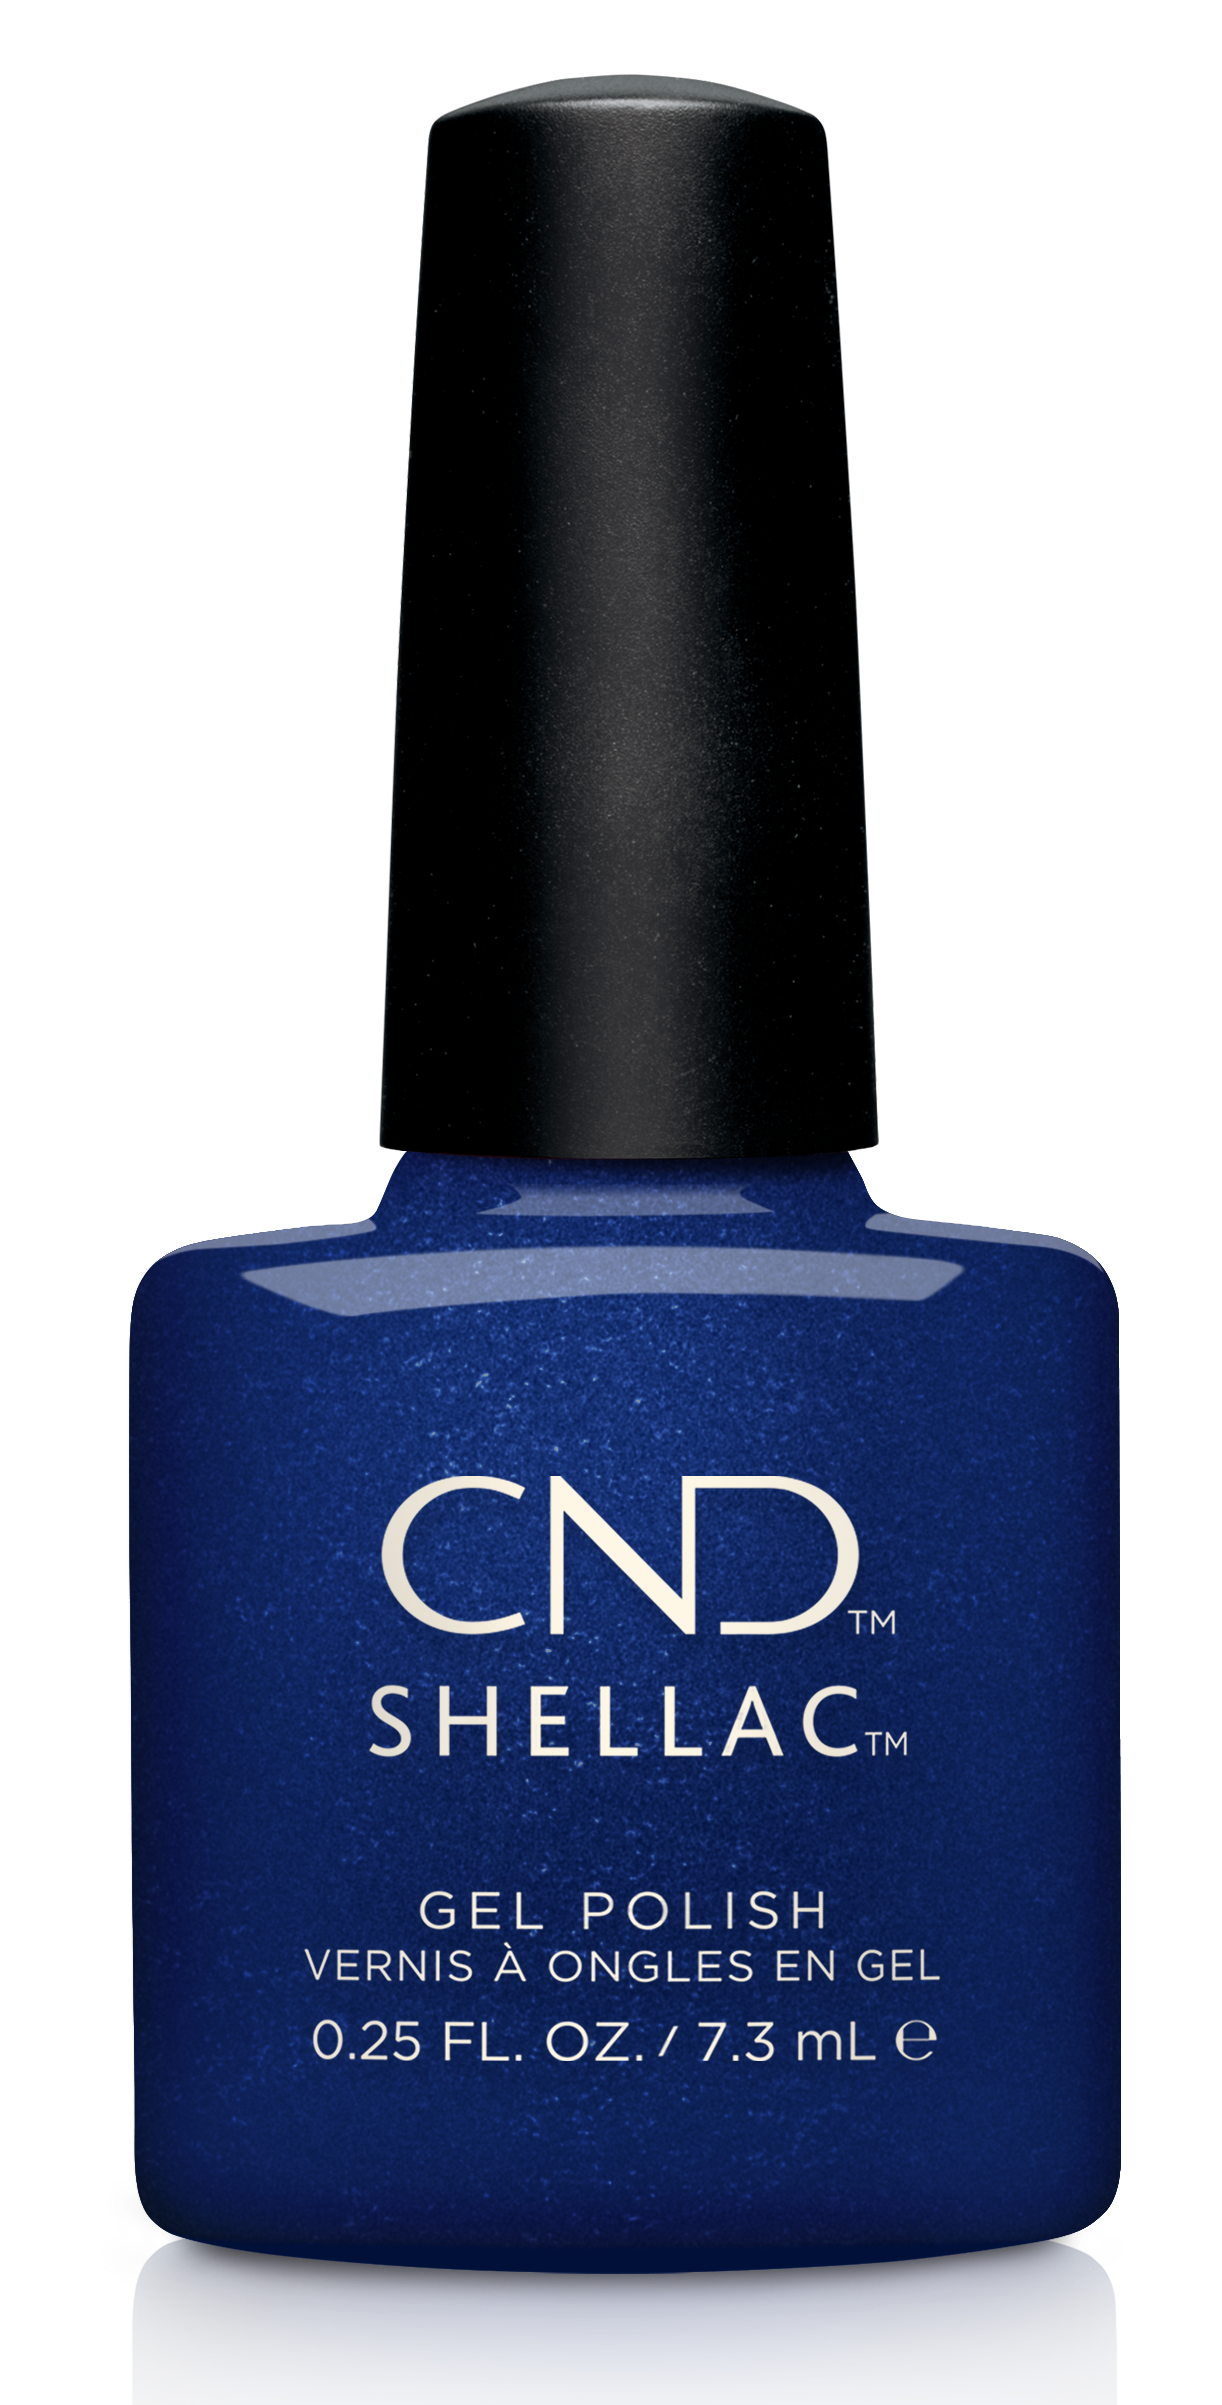 Sassy Sapphire from CND's Crystal Alchemy collection